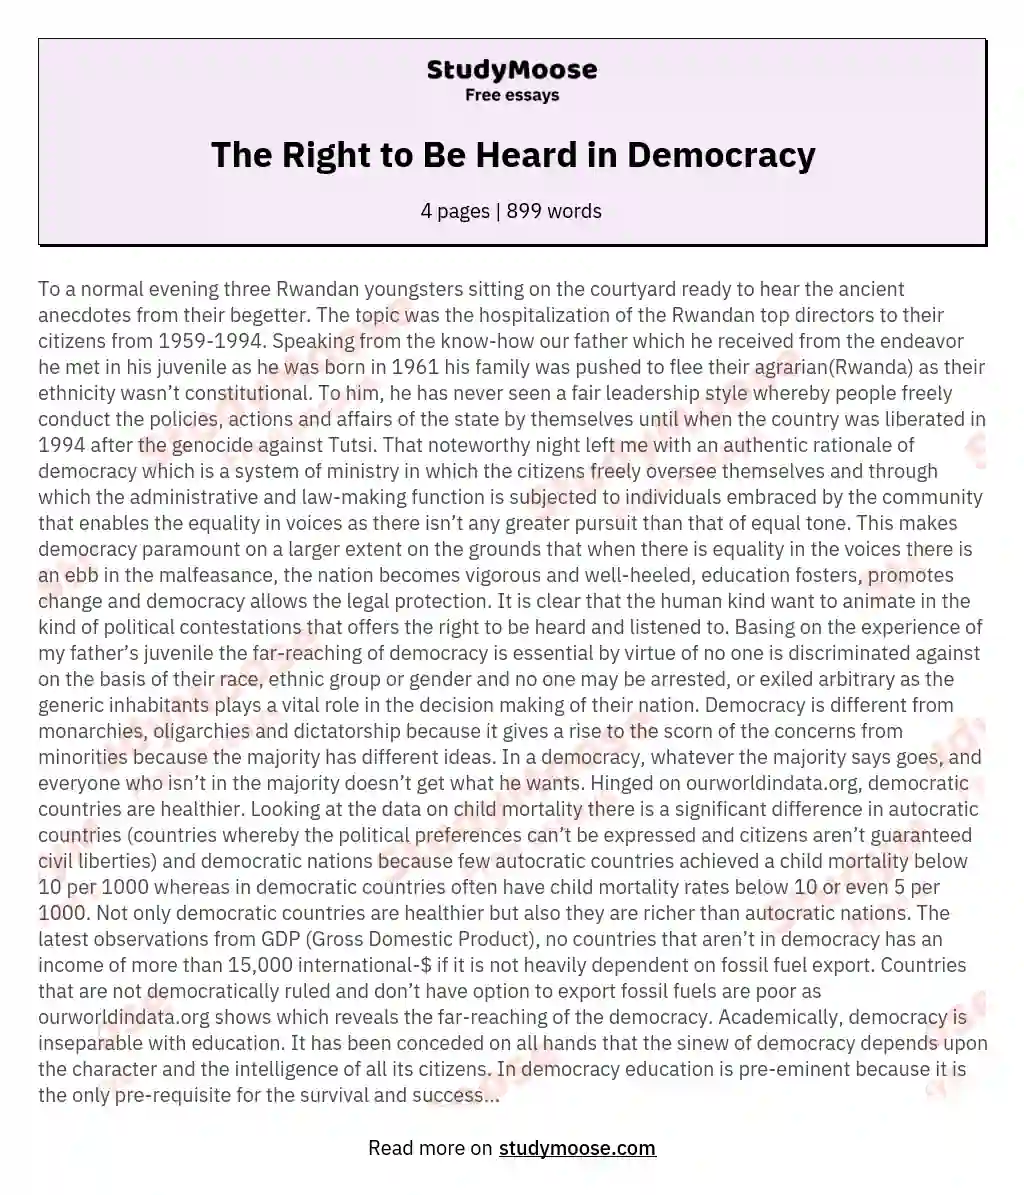 The Right to Be Heard in Democracy essay